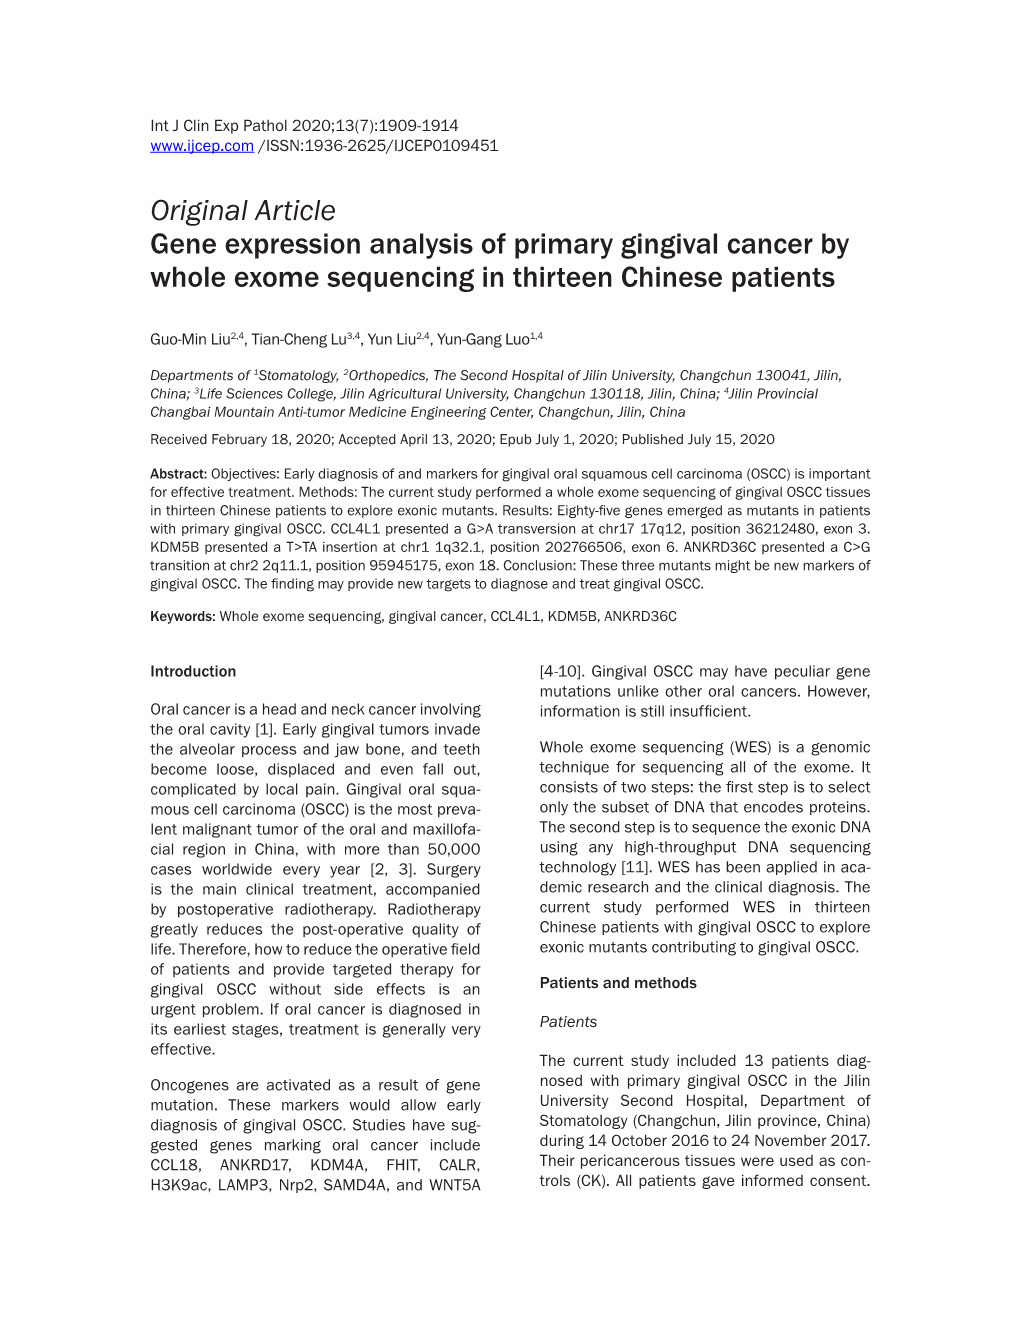 Original Article Gene Expression Analysis of Primary Gingival Cancer by Whole Exome Sequencing in Thirteen Chinese Patients